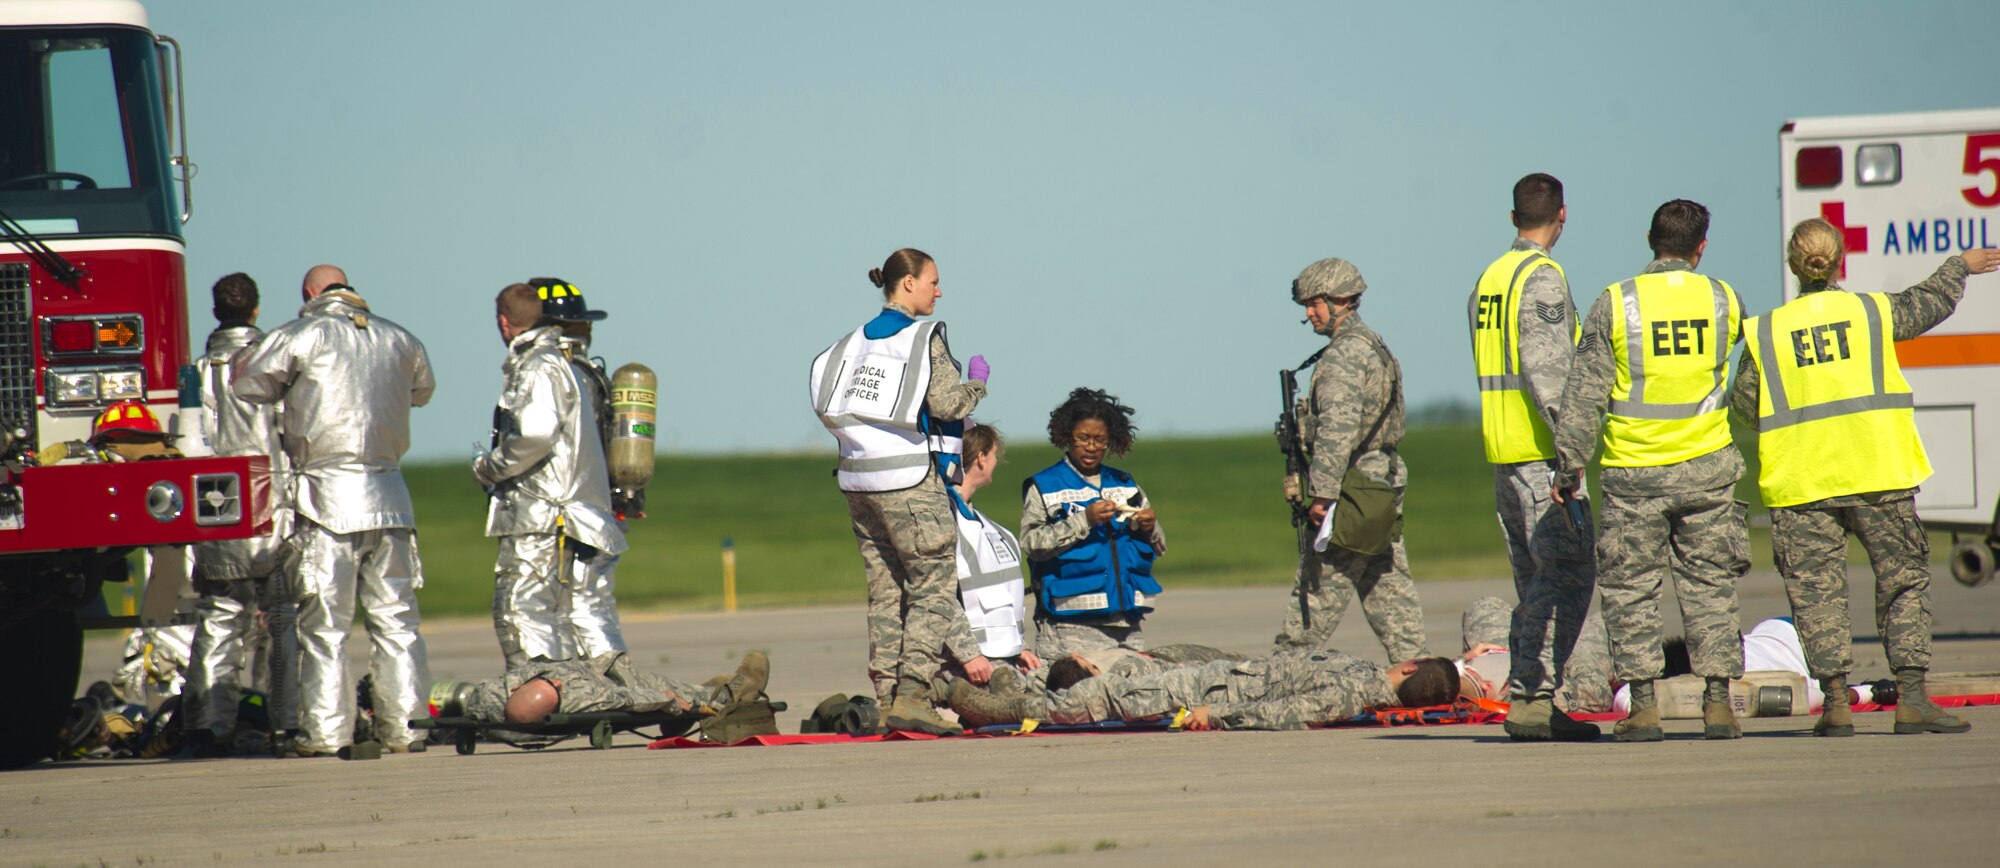 Airmen from the 5th Bomb Wing participate in a mass causality exercise at Minot Air Force Base, N.D., June 27, 2013. The purpose of the exercise is to evaluate and validate the 5th BW’s emergency management capabilities and testing first responders and medical personnel on their ability to quickly and effectively respond to a catastrophic event.  (U.S. Air Force photos/Senior Airman Brittany Y. Auld)